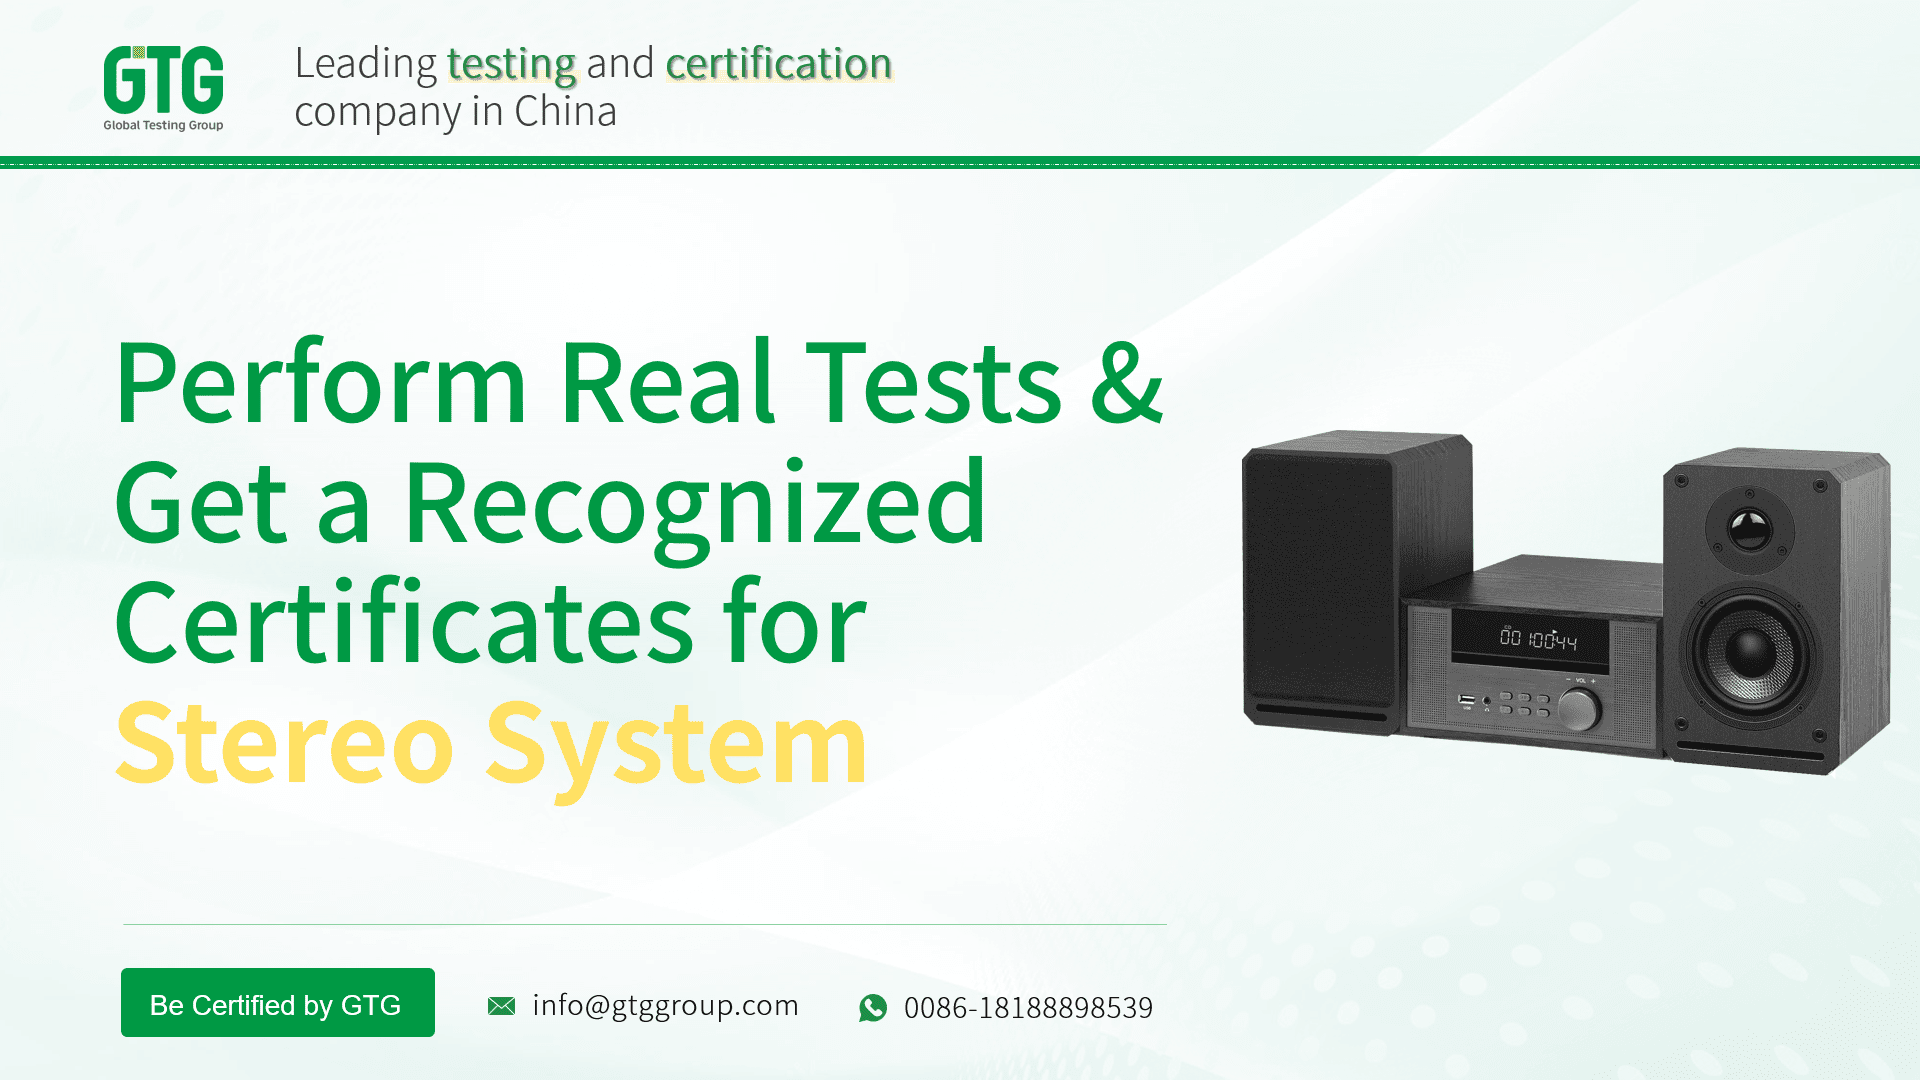 Get Test Report and Certifications for Stereo System from GTG Group